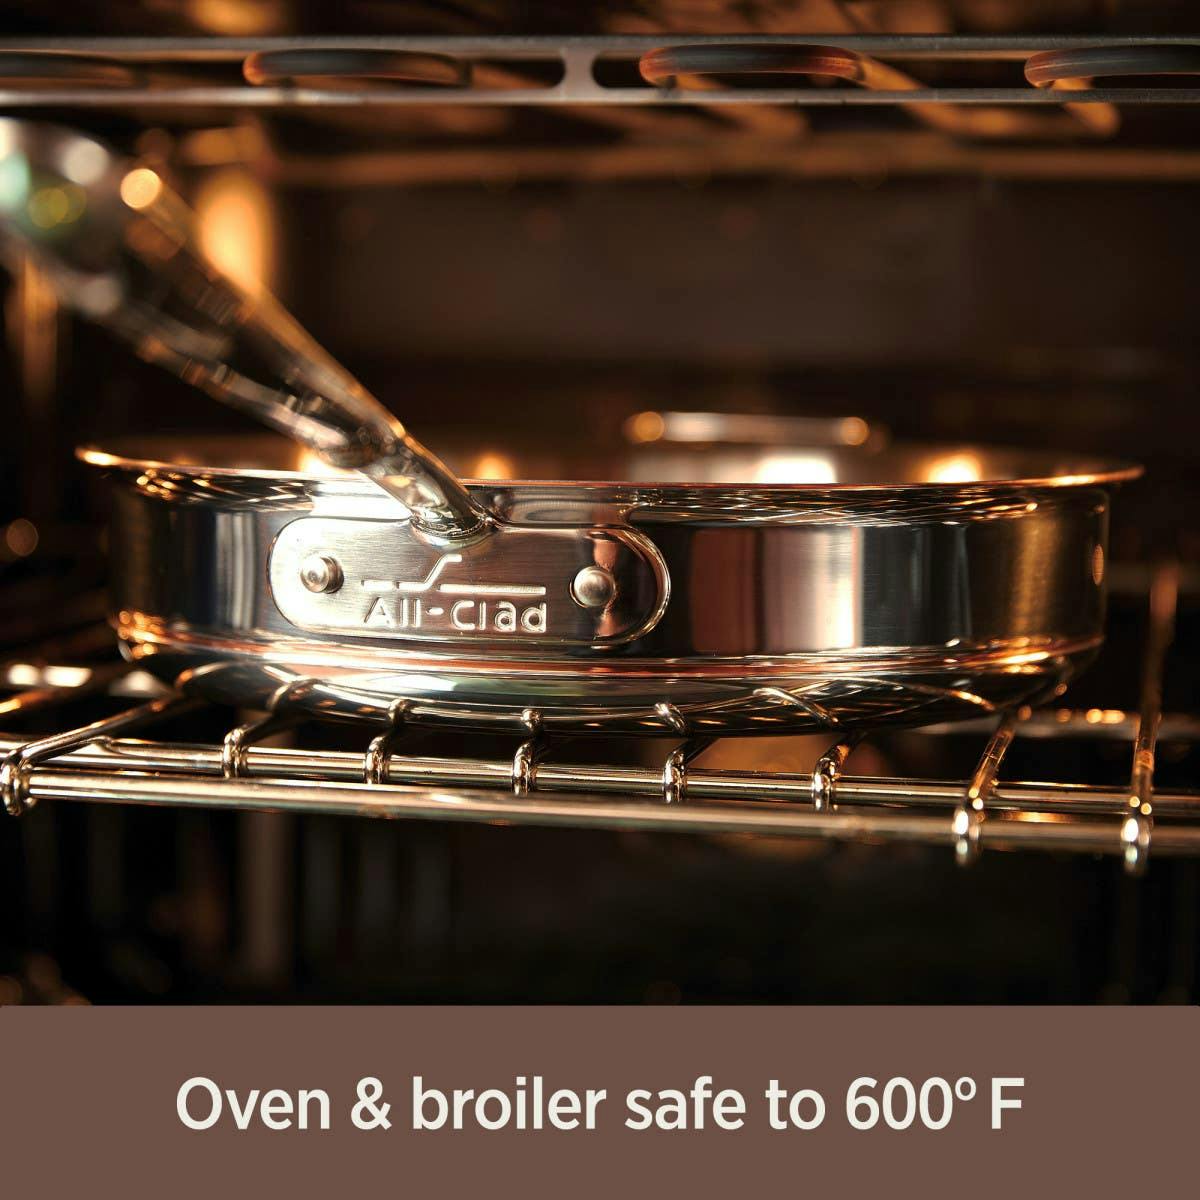 All-Clad Copper Core 5-Ply Stainless Steel Cookware Set 10 Piece Induction  Oven Broiler Safe 600F Pots and Pans Silver